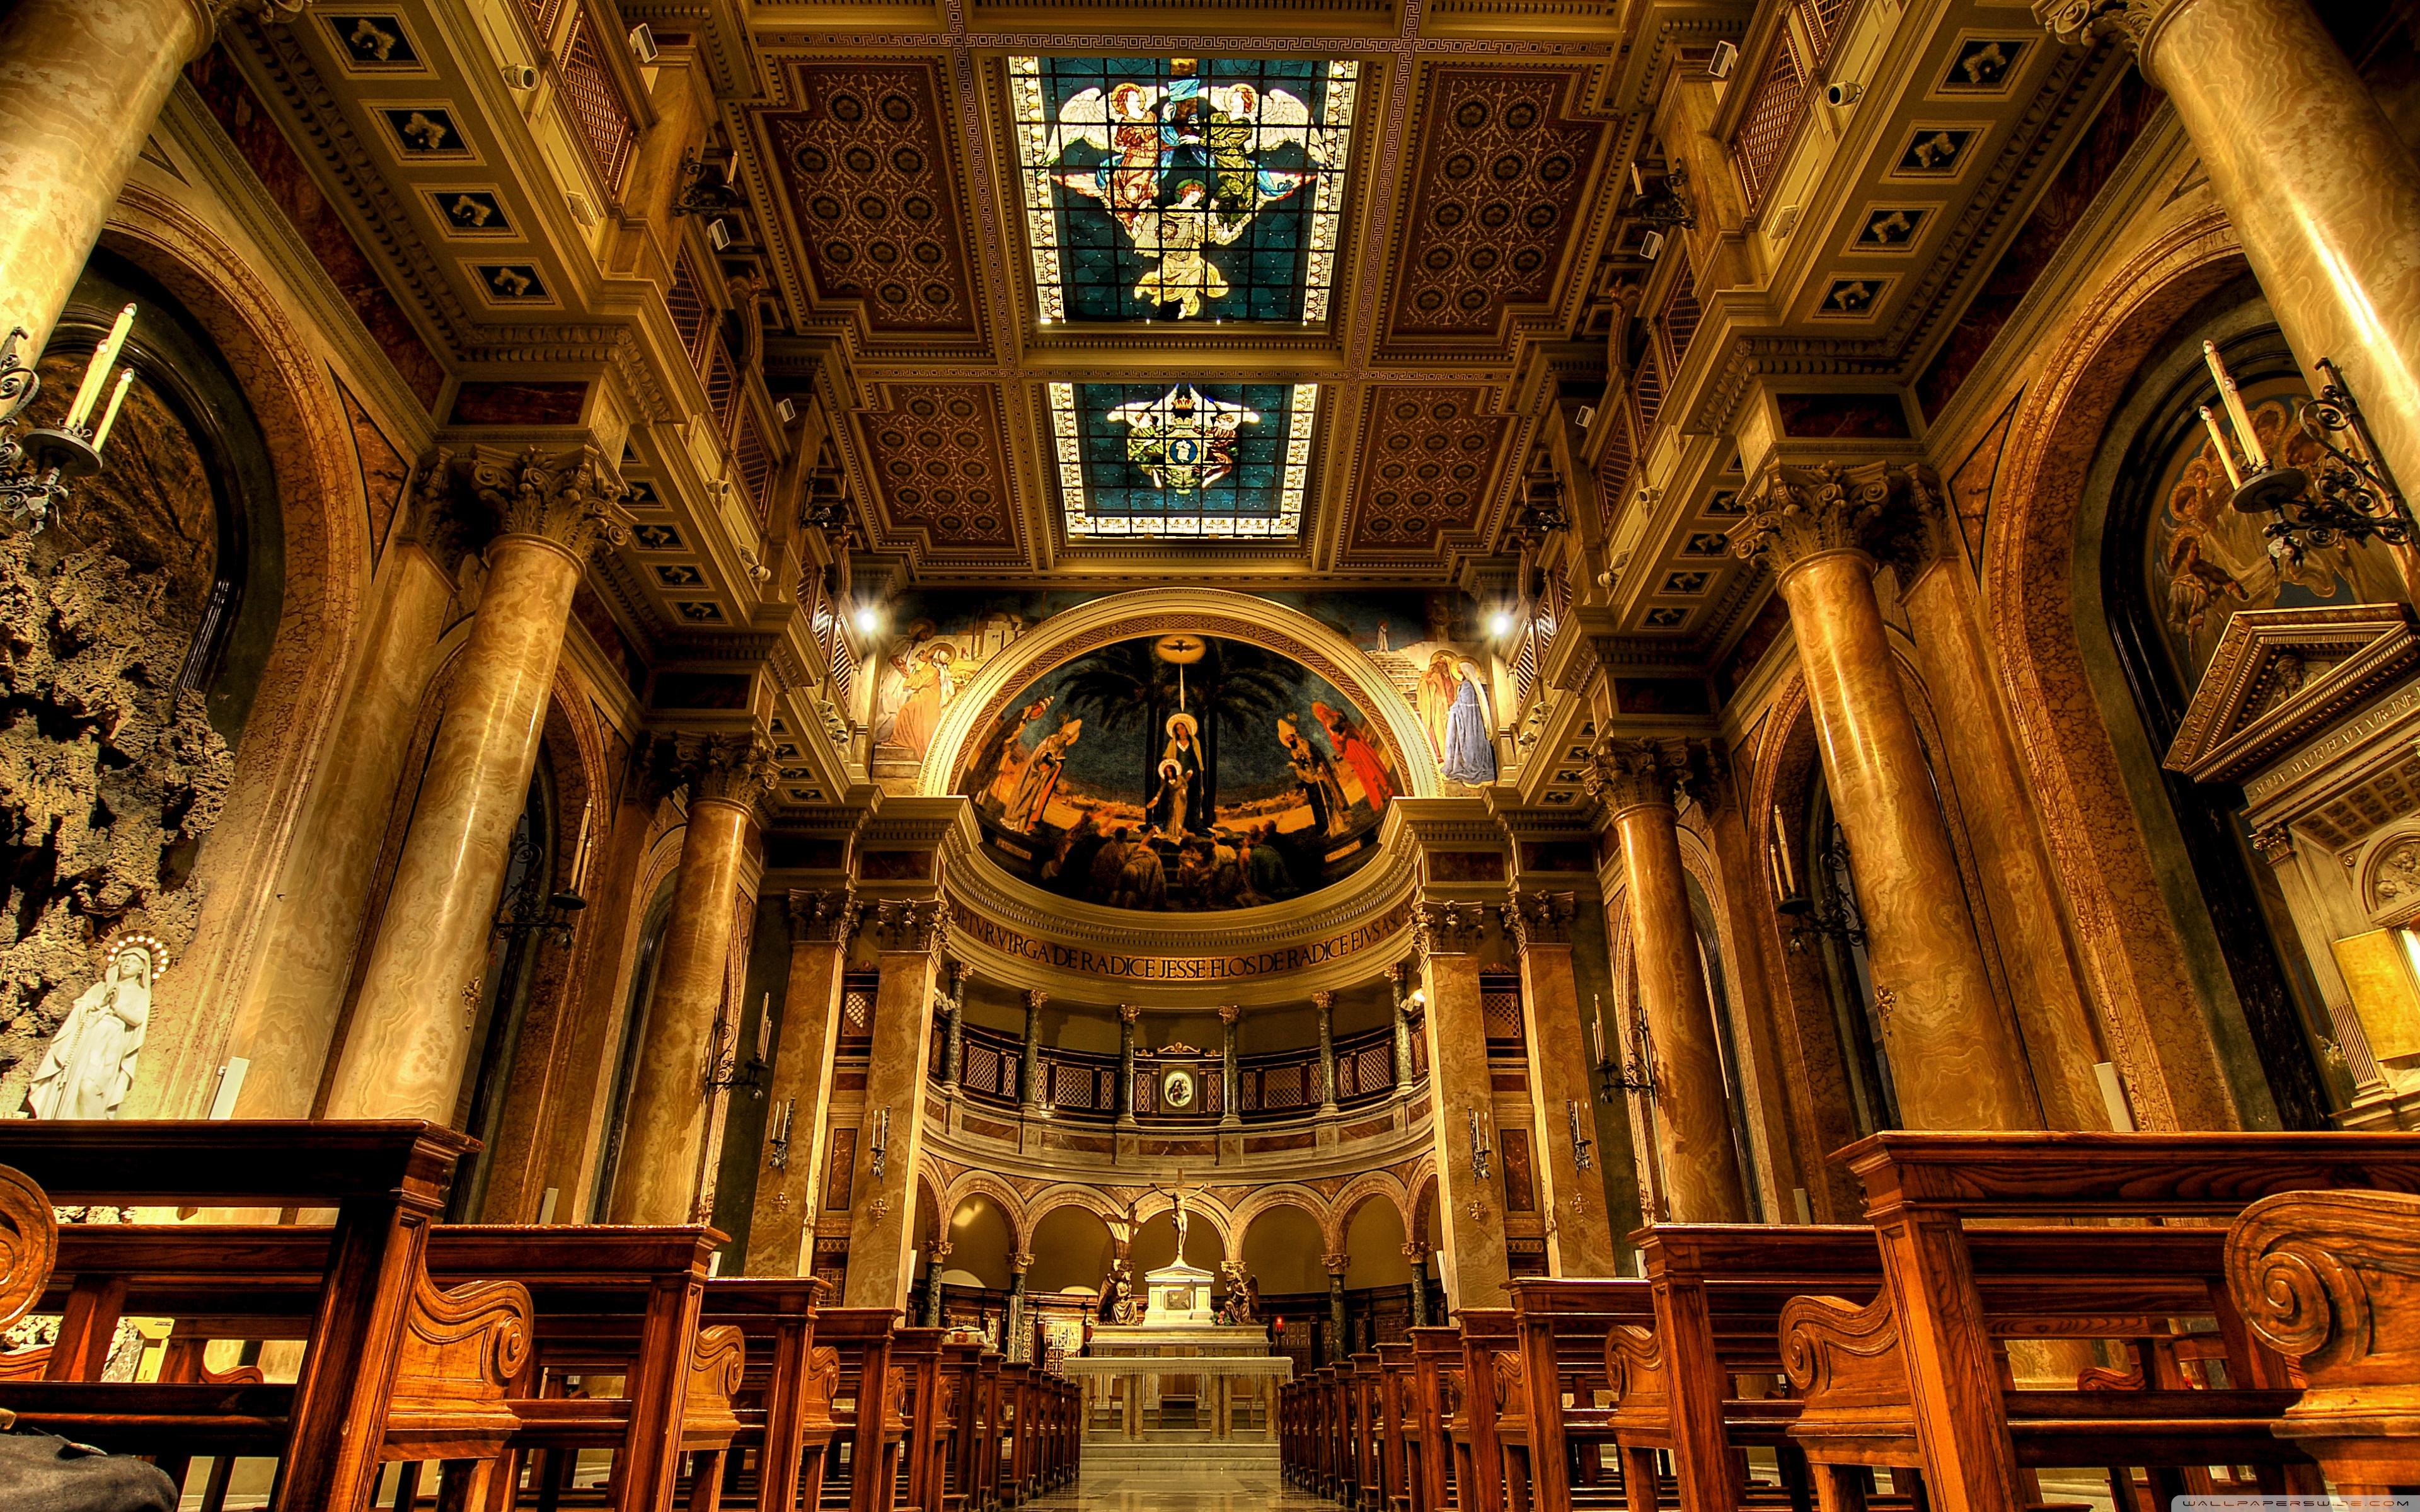 Church Images [Hd] - Download Church Pictures For Free